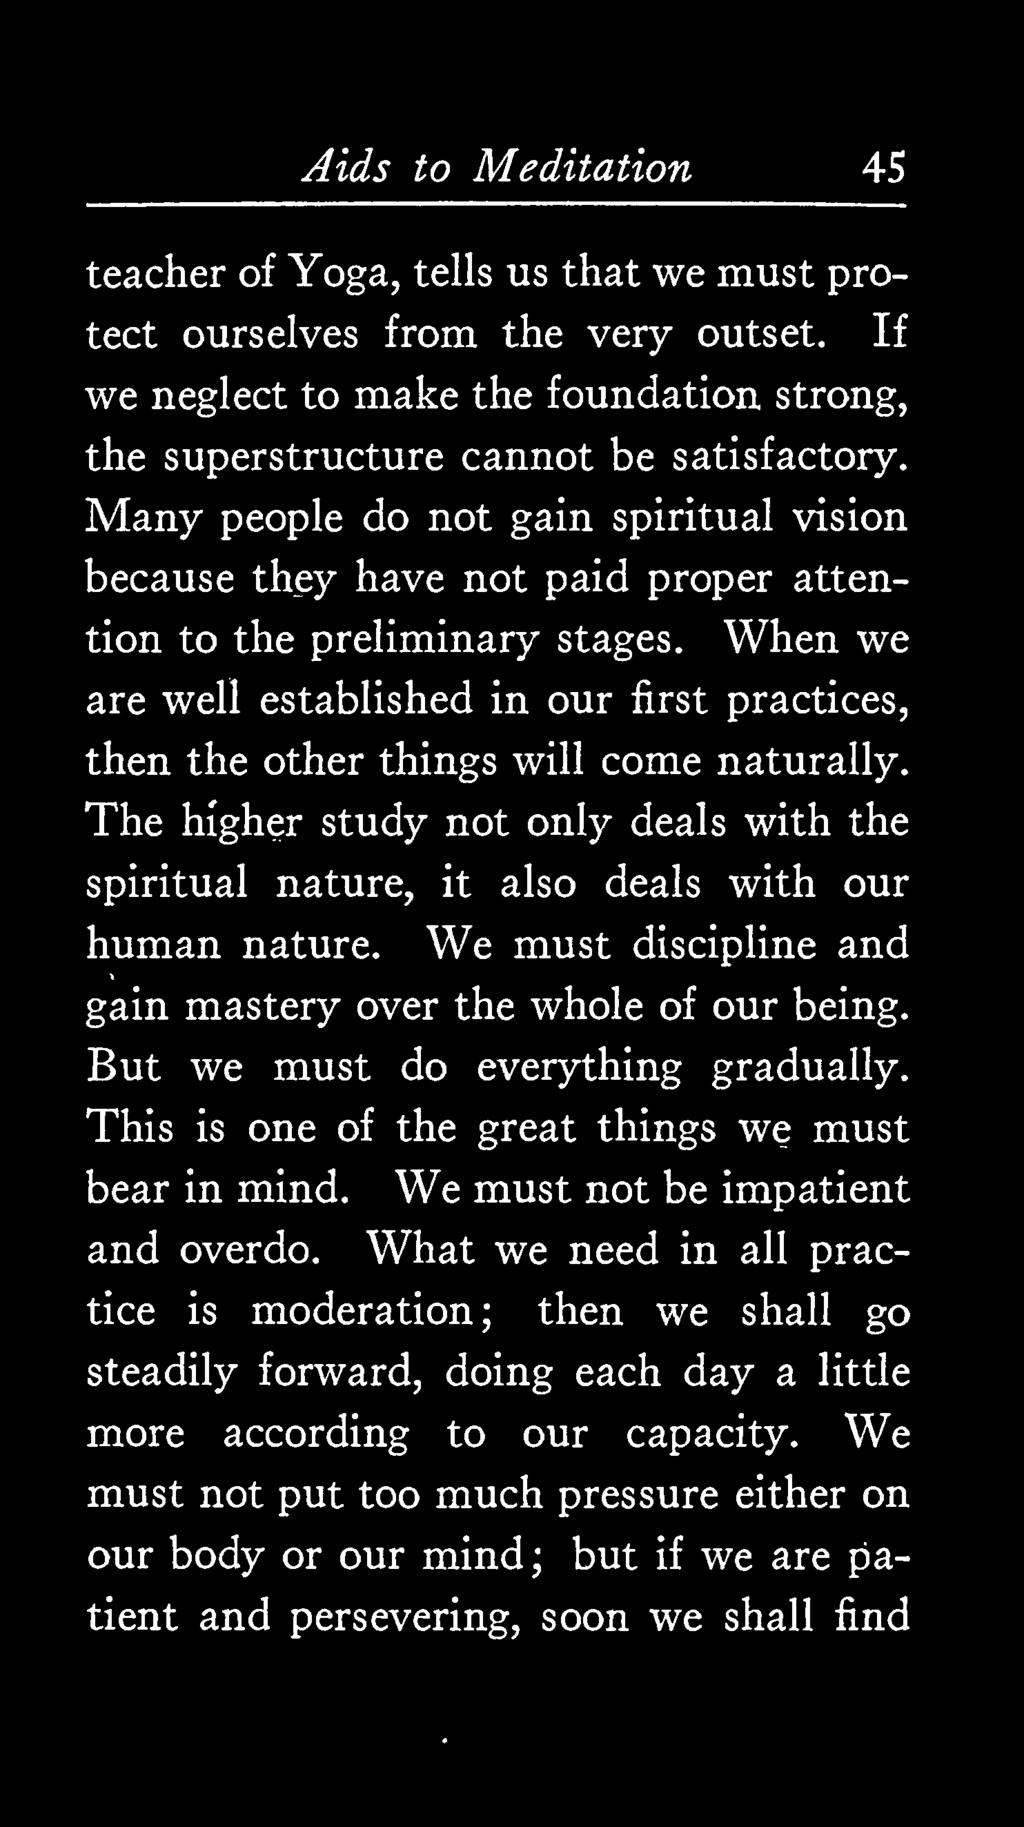 are well established in our first When we practices, then the other things will come naturally. The higher study not only spiritual nature, deals with the it also deals with our human nature.